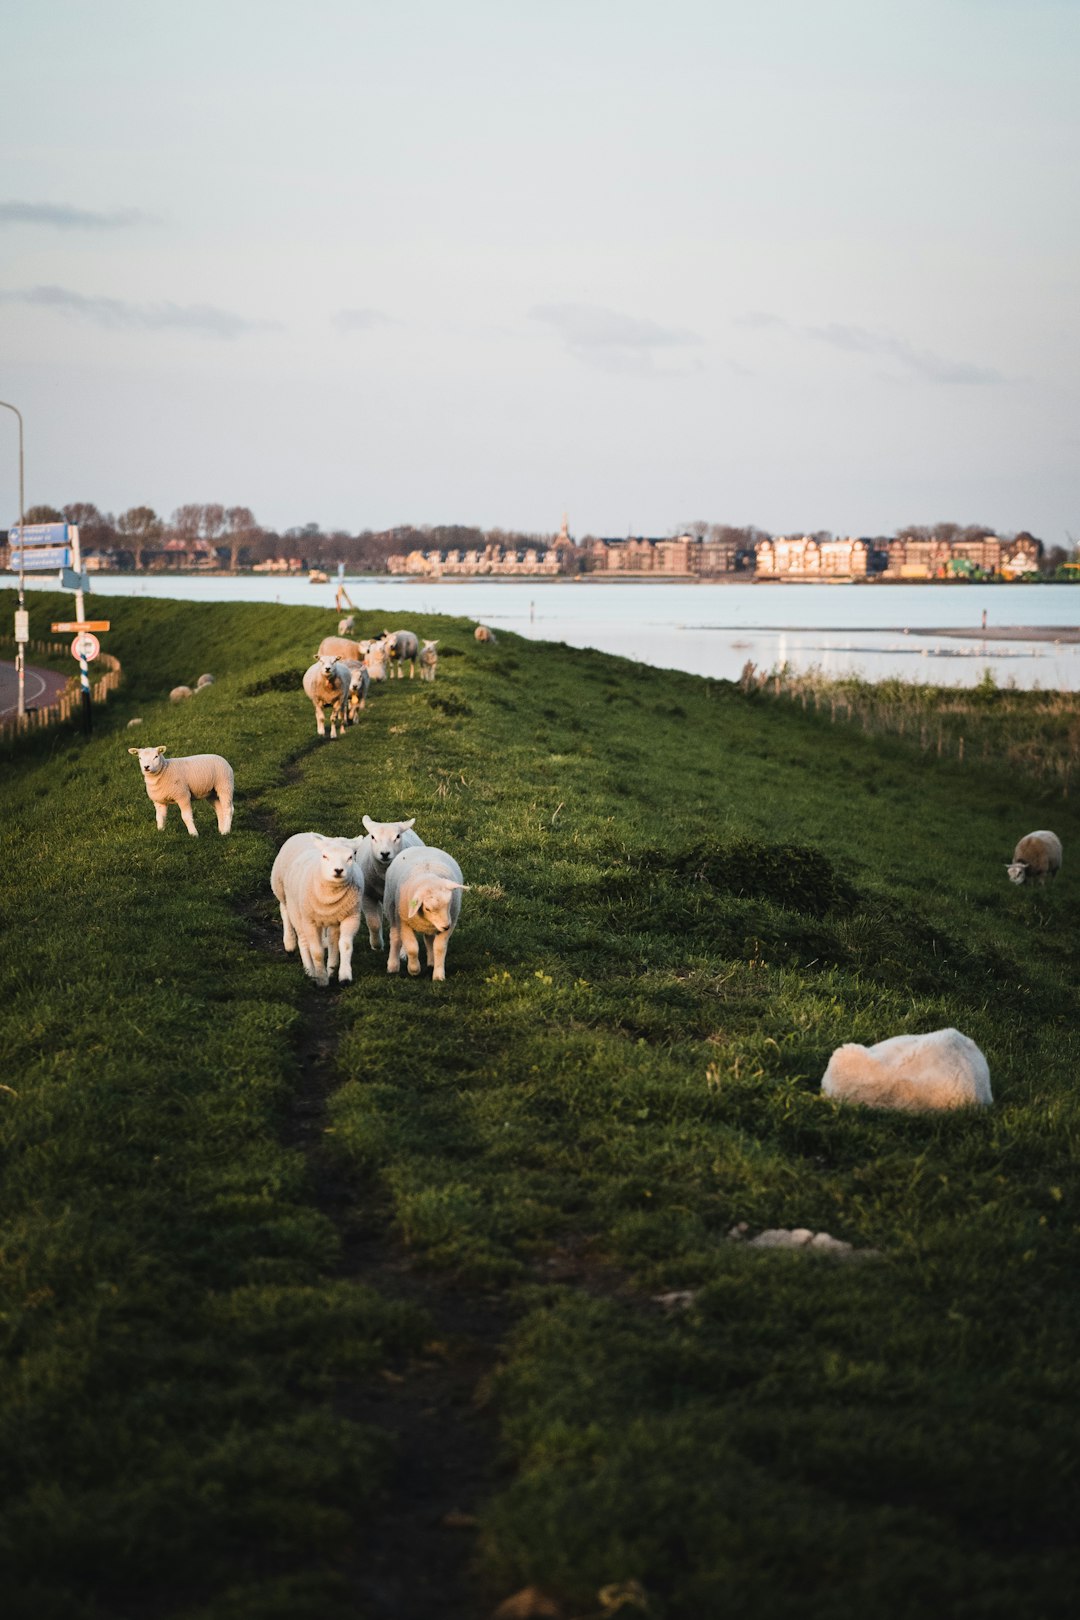 herd of sheep on green grass field near body of water during daytime